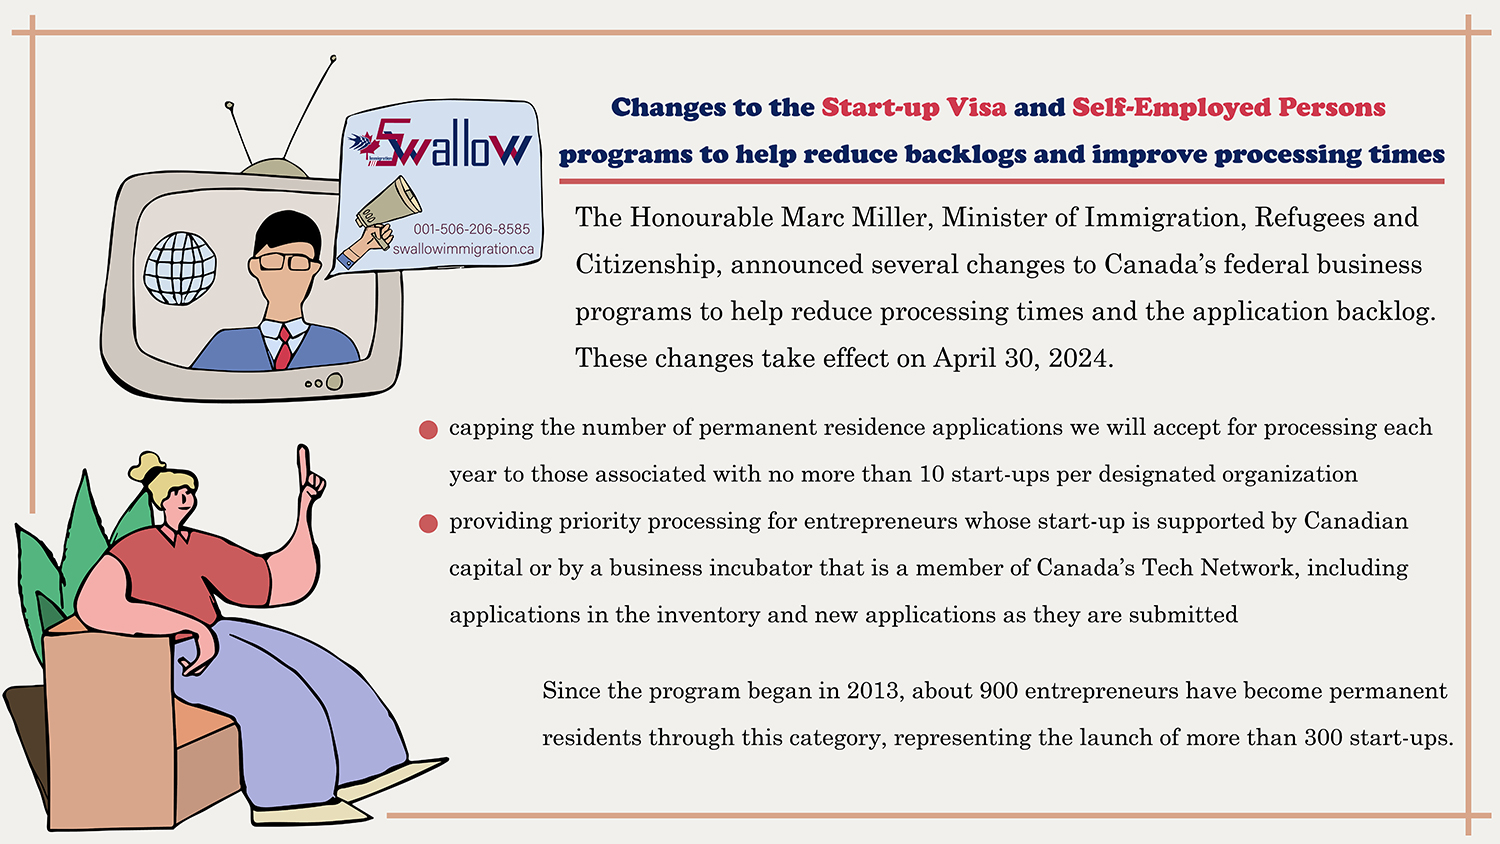 Changes to the Start-up Visa and Self-Employed Persons programs to help reduce backlogs and improve processing times